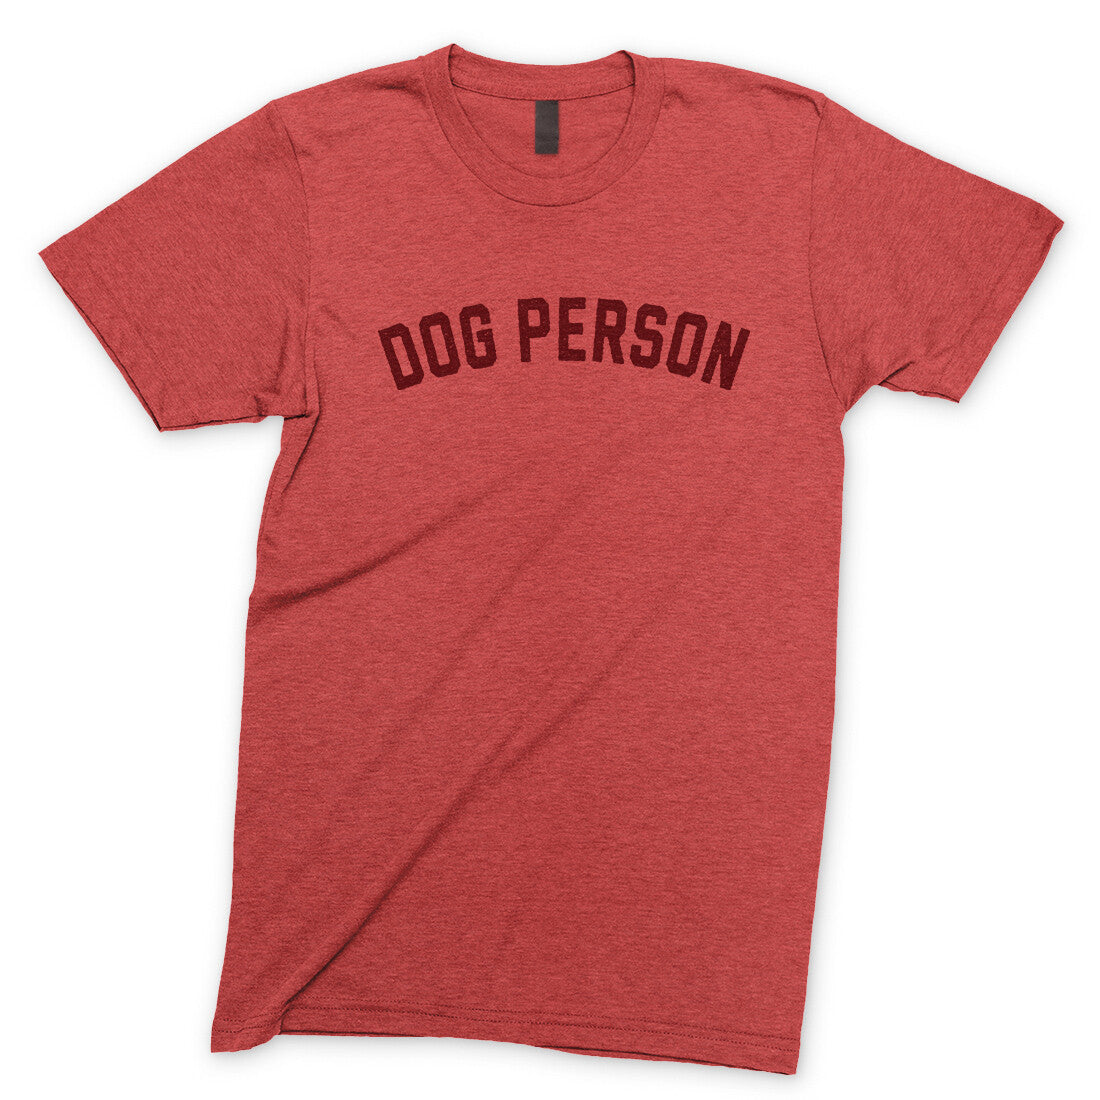 Dog Person in Heather Red Color